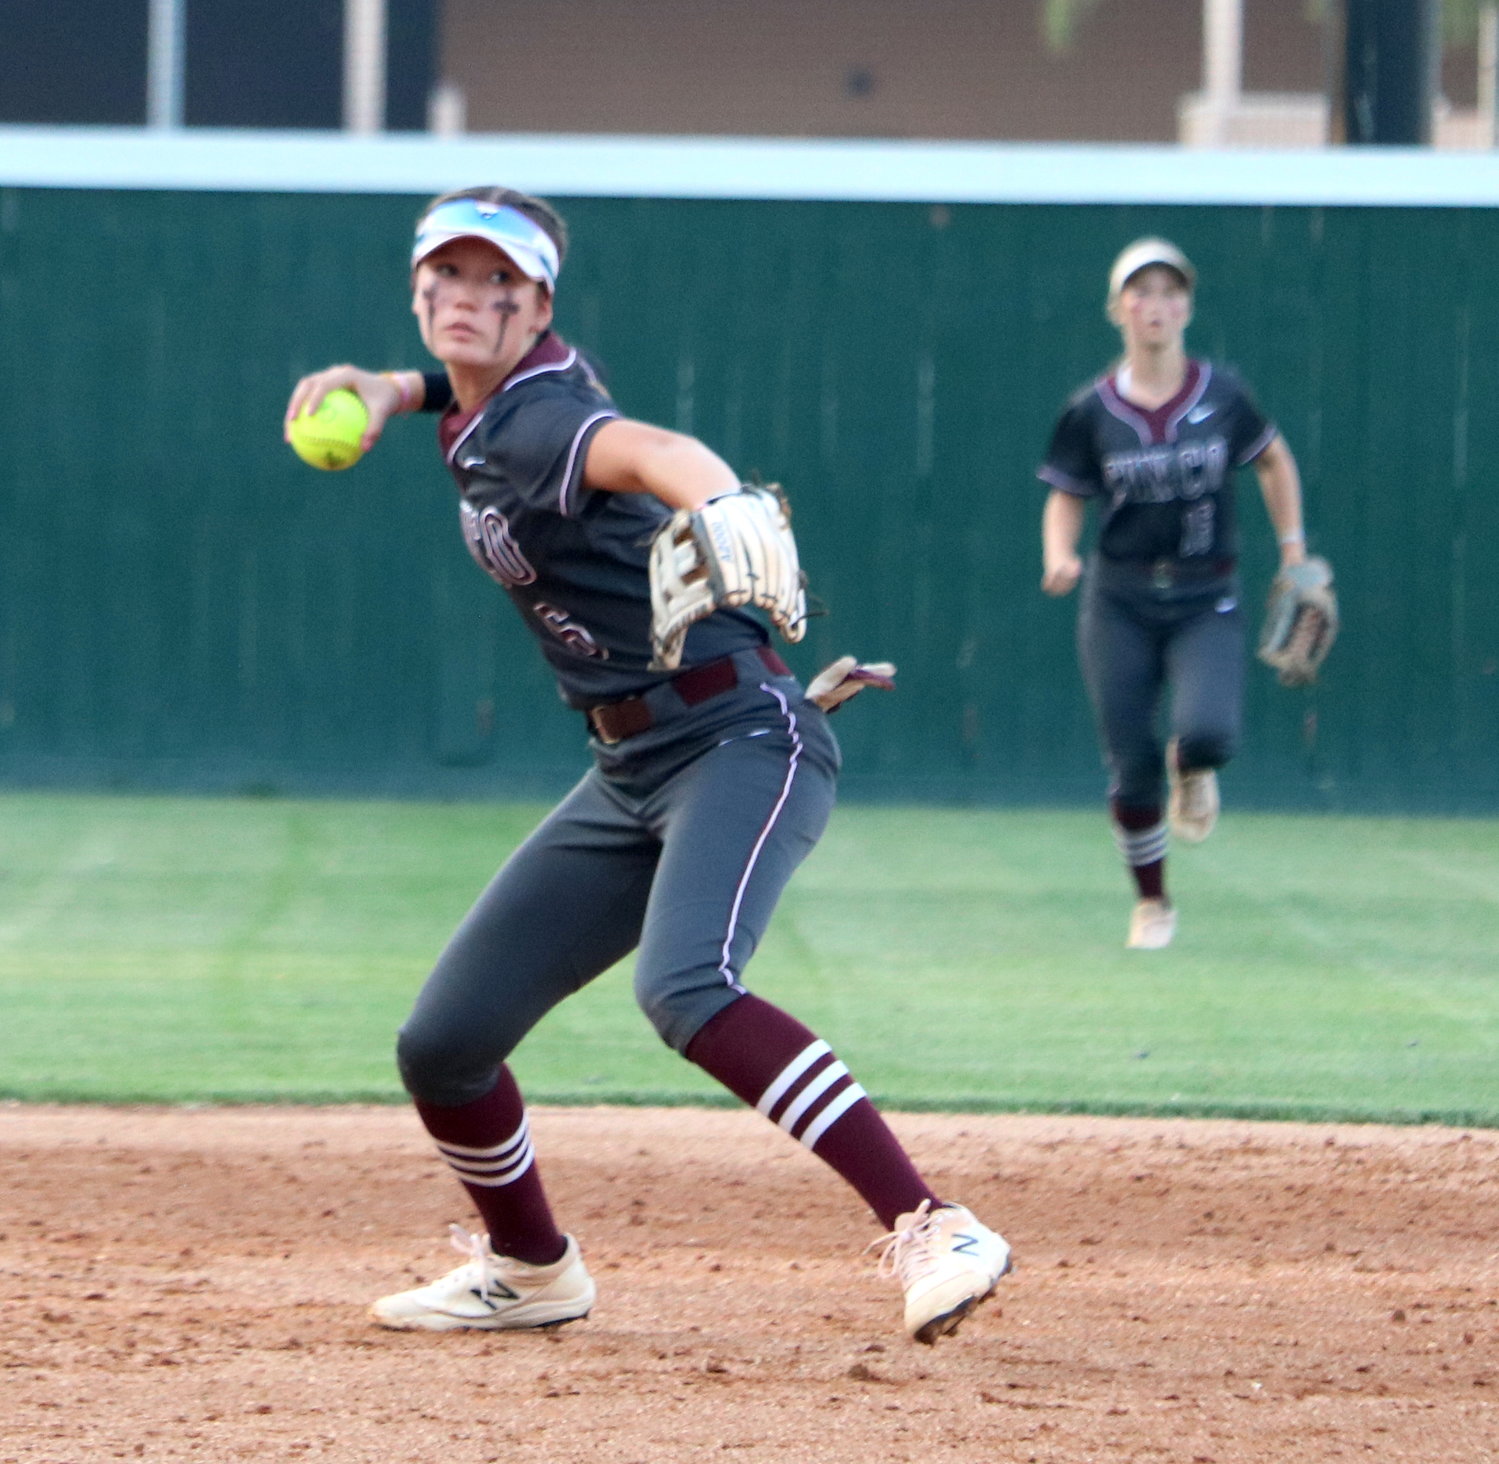 Faith Piper throws a ball to first base during Friday's area round game between Cinco Ranch and Heights at Memorial High School